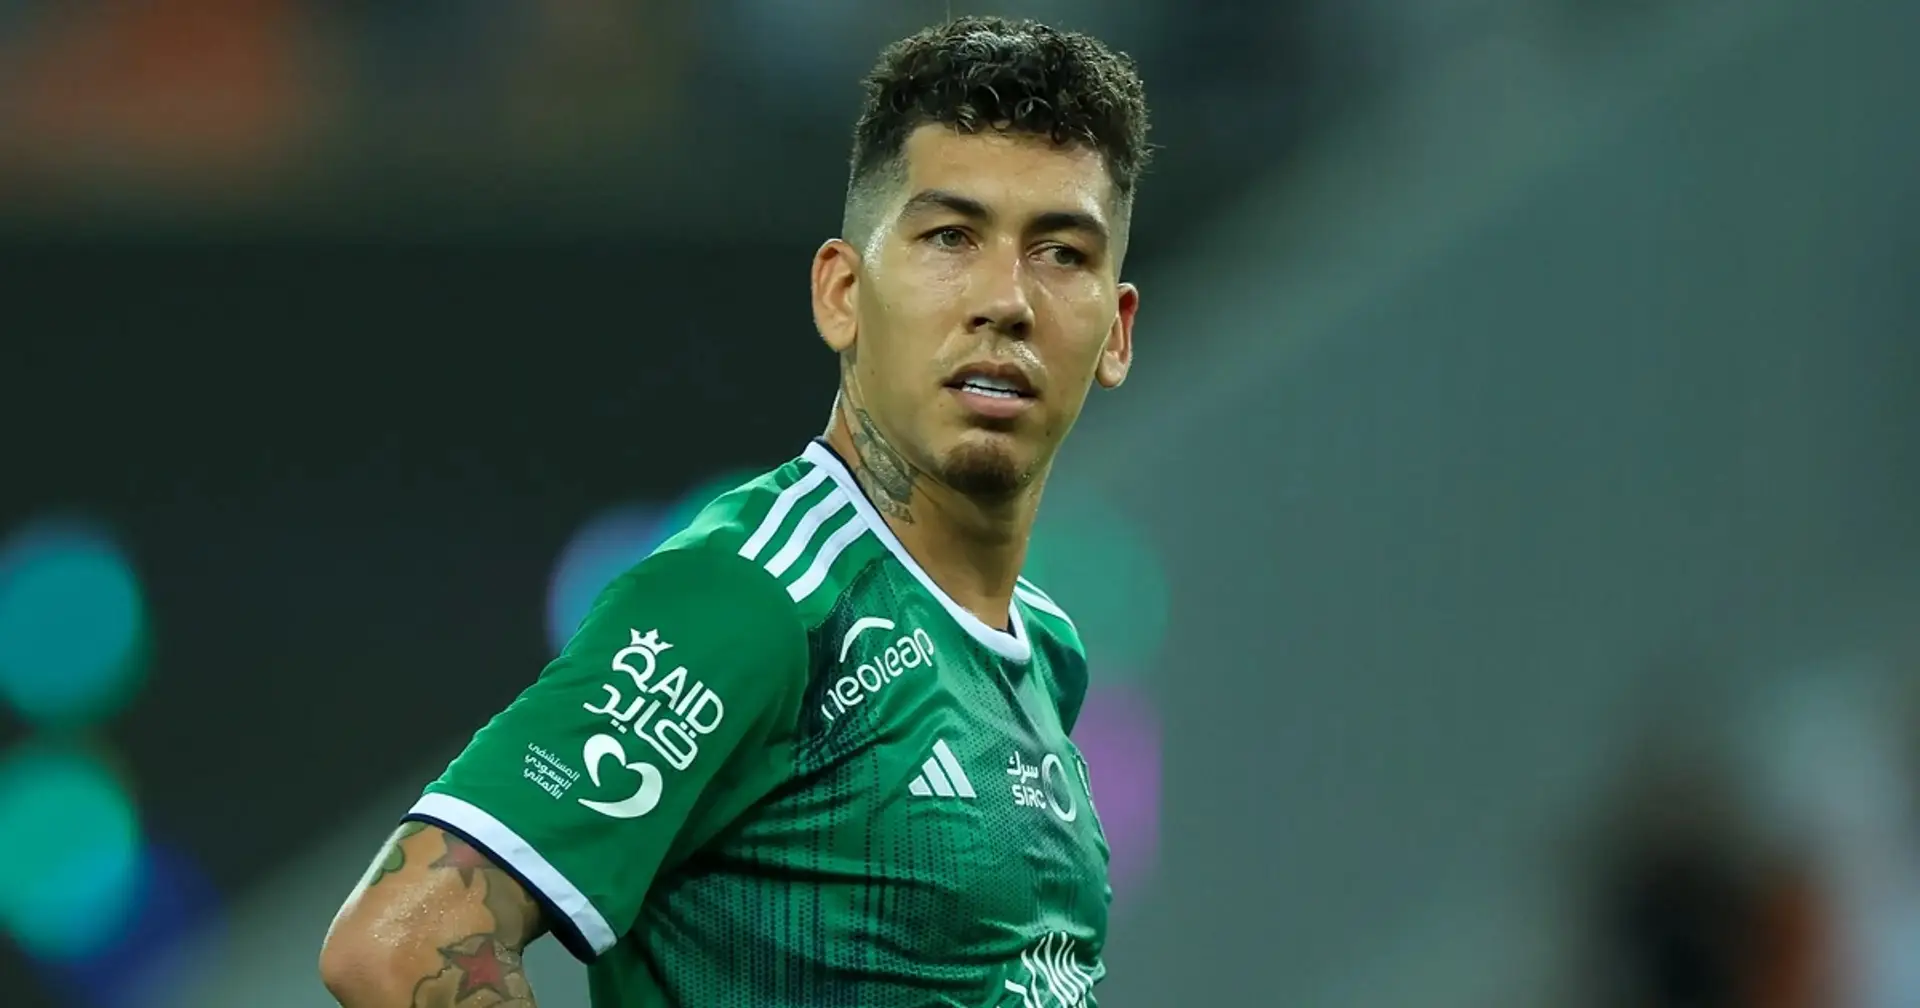 'Bring him home': some Liverpool fans want Roberto Firmino back amid Saudi exit rumours